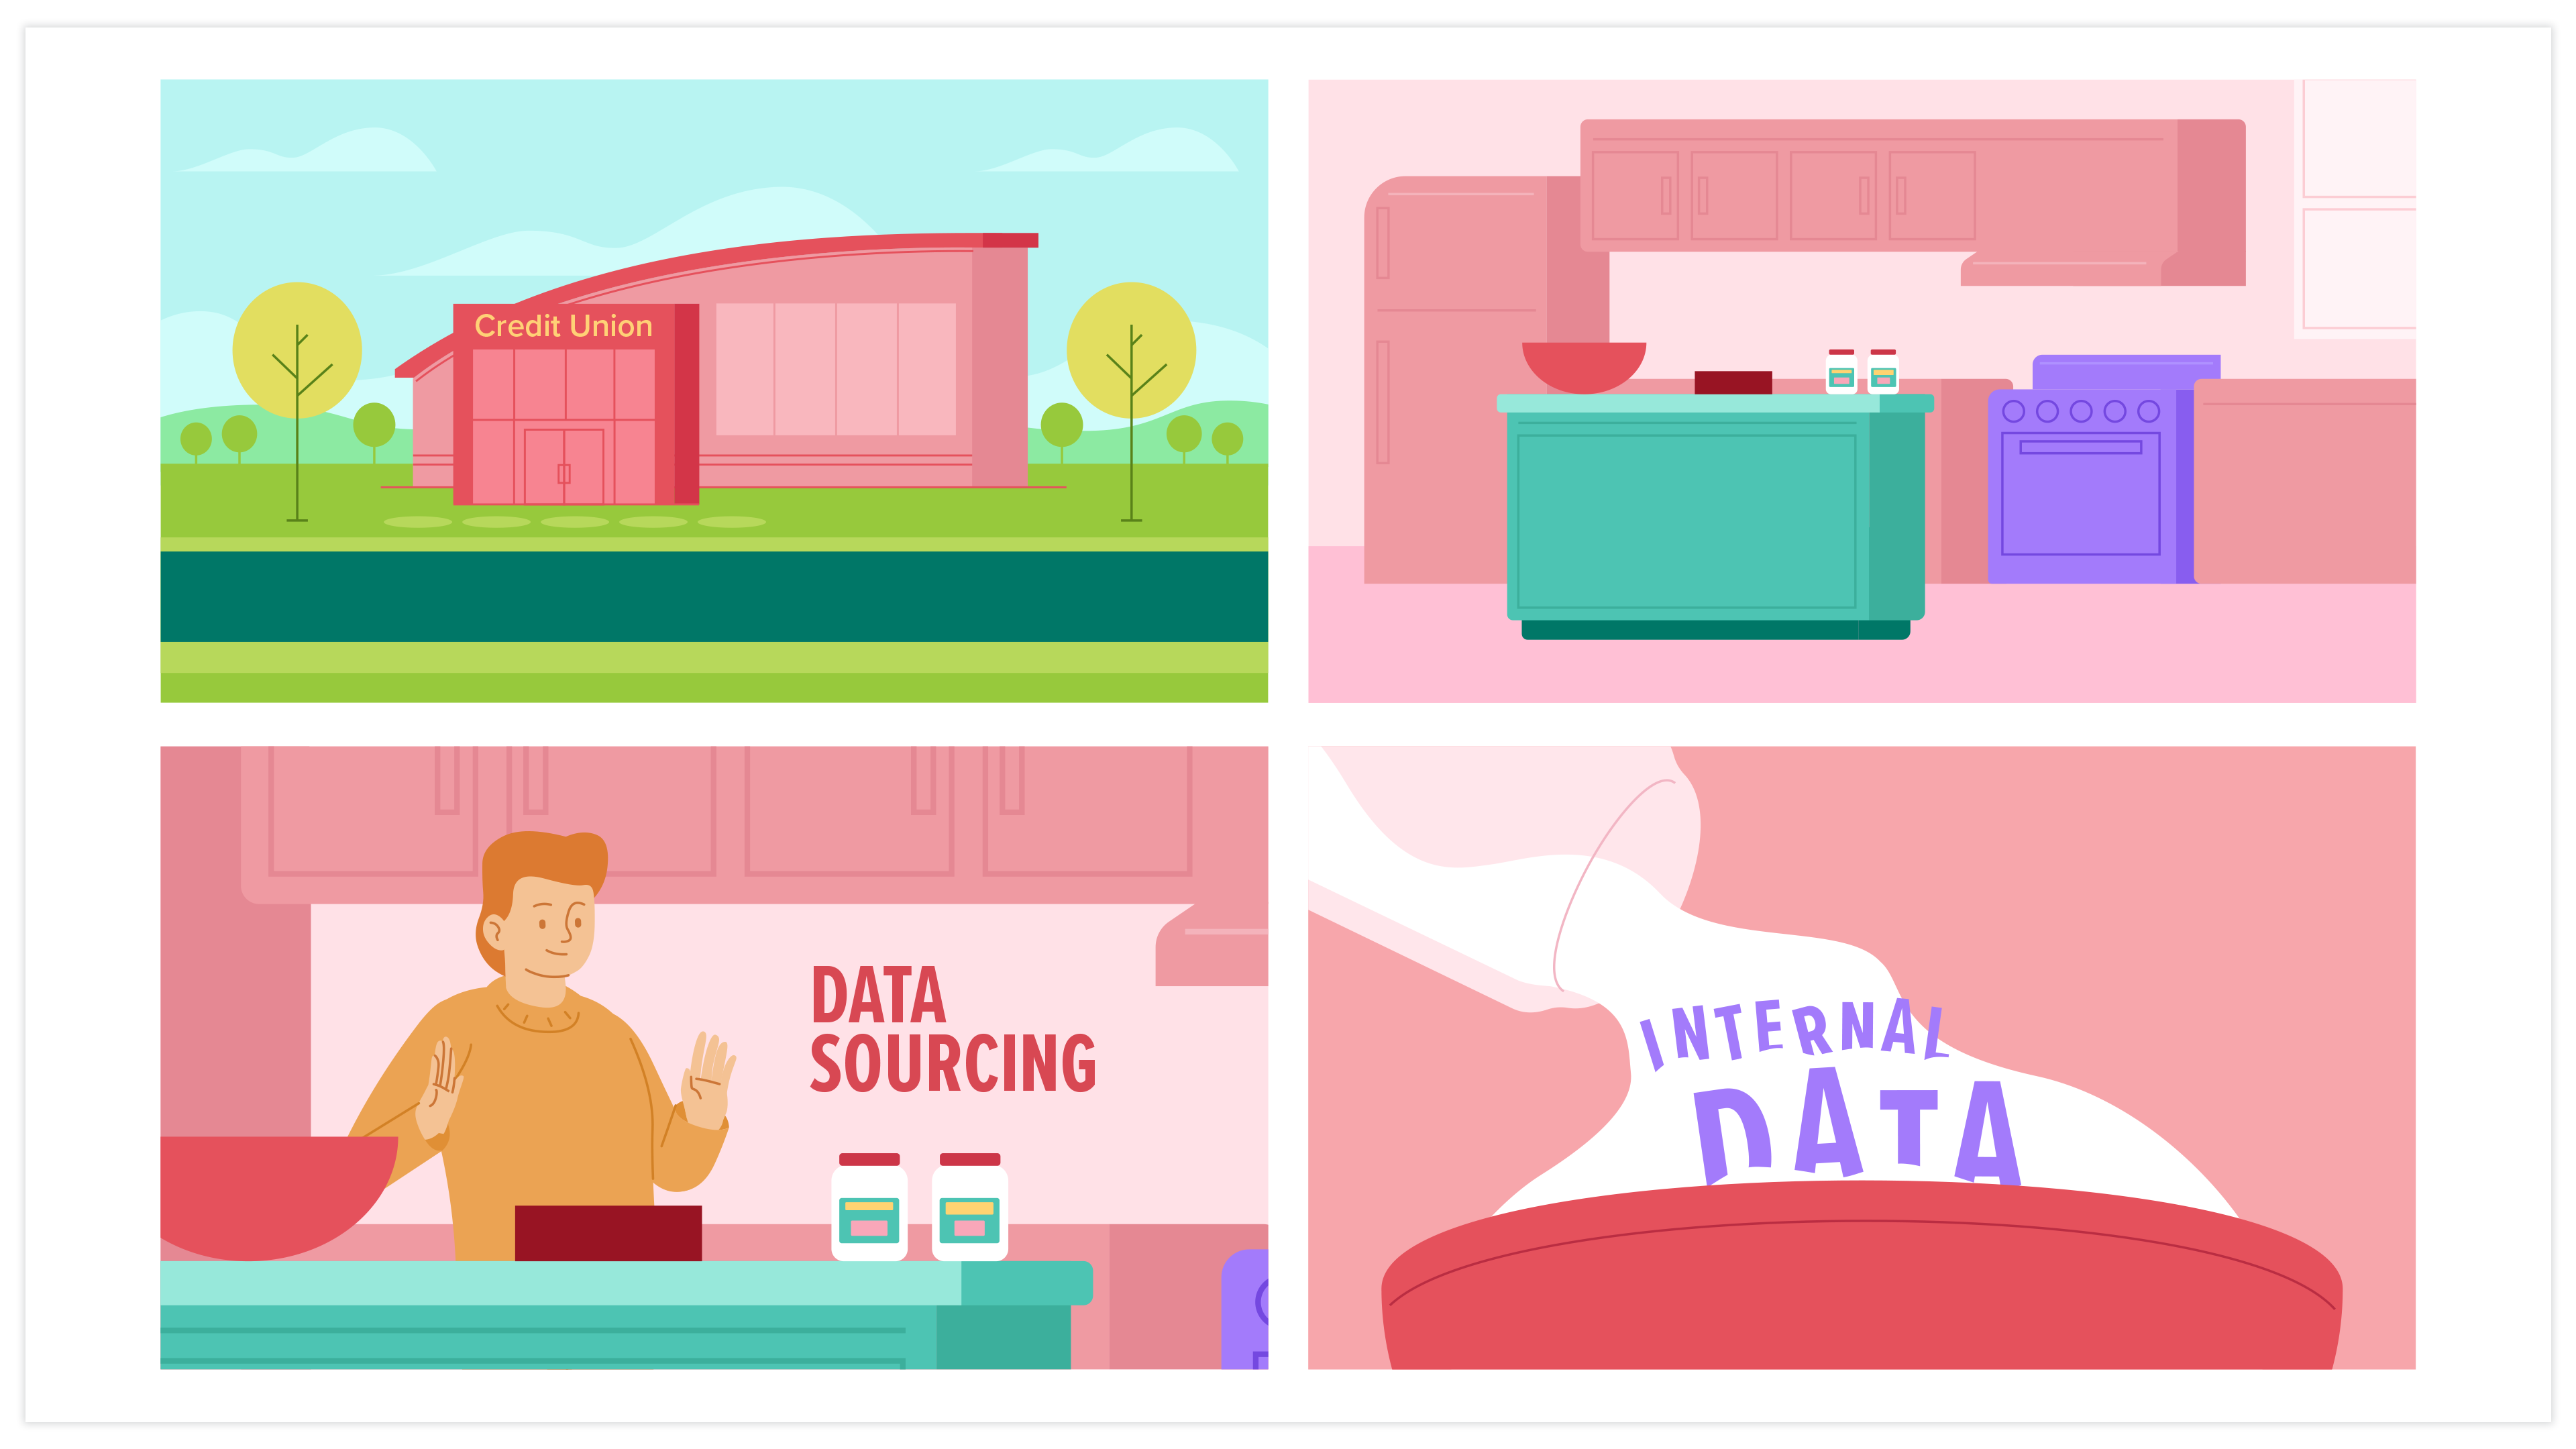 Selection of four storyboards. From top left to bottom right there are illustrations of a credit union building, a kitchen, a character with baking tools and the words "Data Sourcing", and finally an ingredient being poured into a bowl with the words "Internal Data".